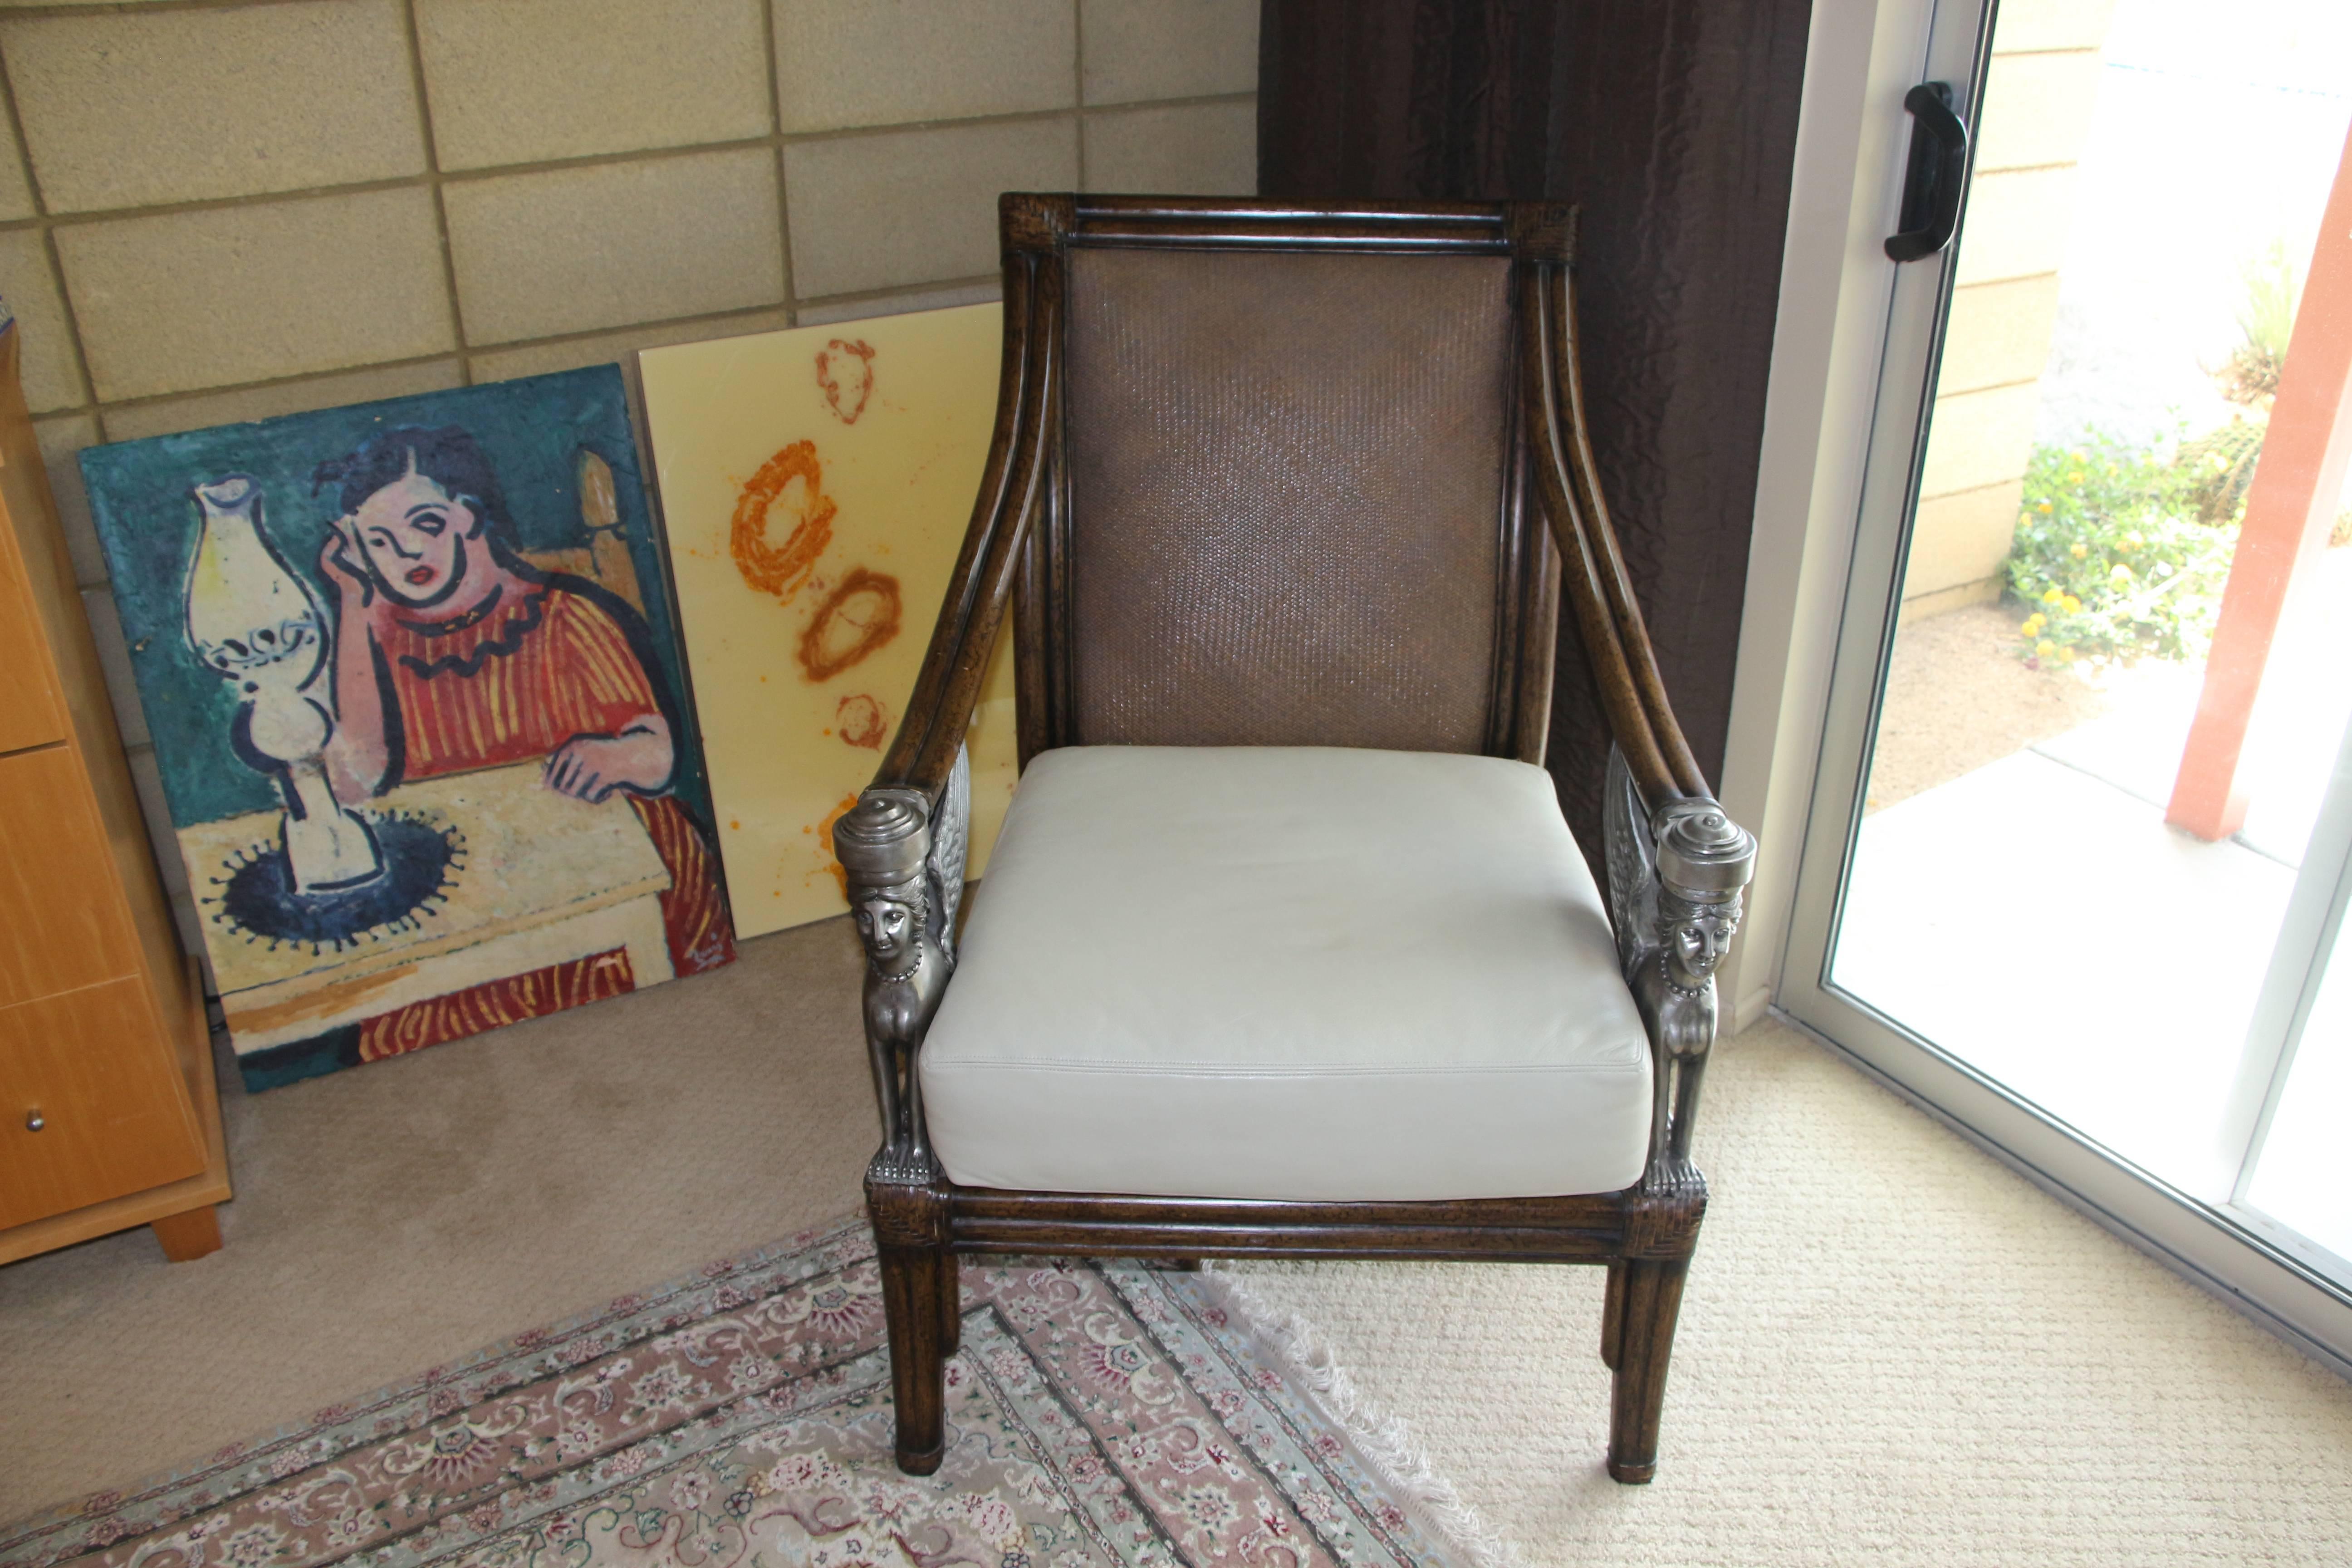 A wonderful armchair with a leather cushion seat that appears to have been recently re-upholstered. The chair made or wood, rattan and fantastic metal Sphinxes as arm supports. This estate was filed almost exclusively with Maitland-Smith or Marge